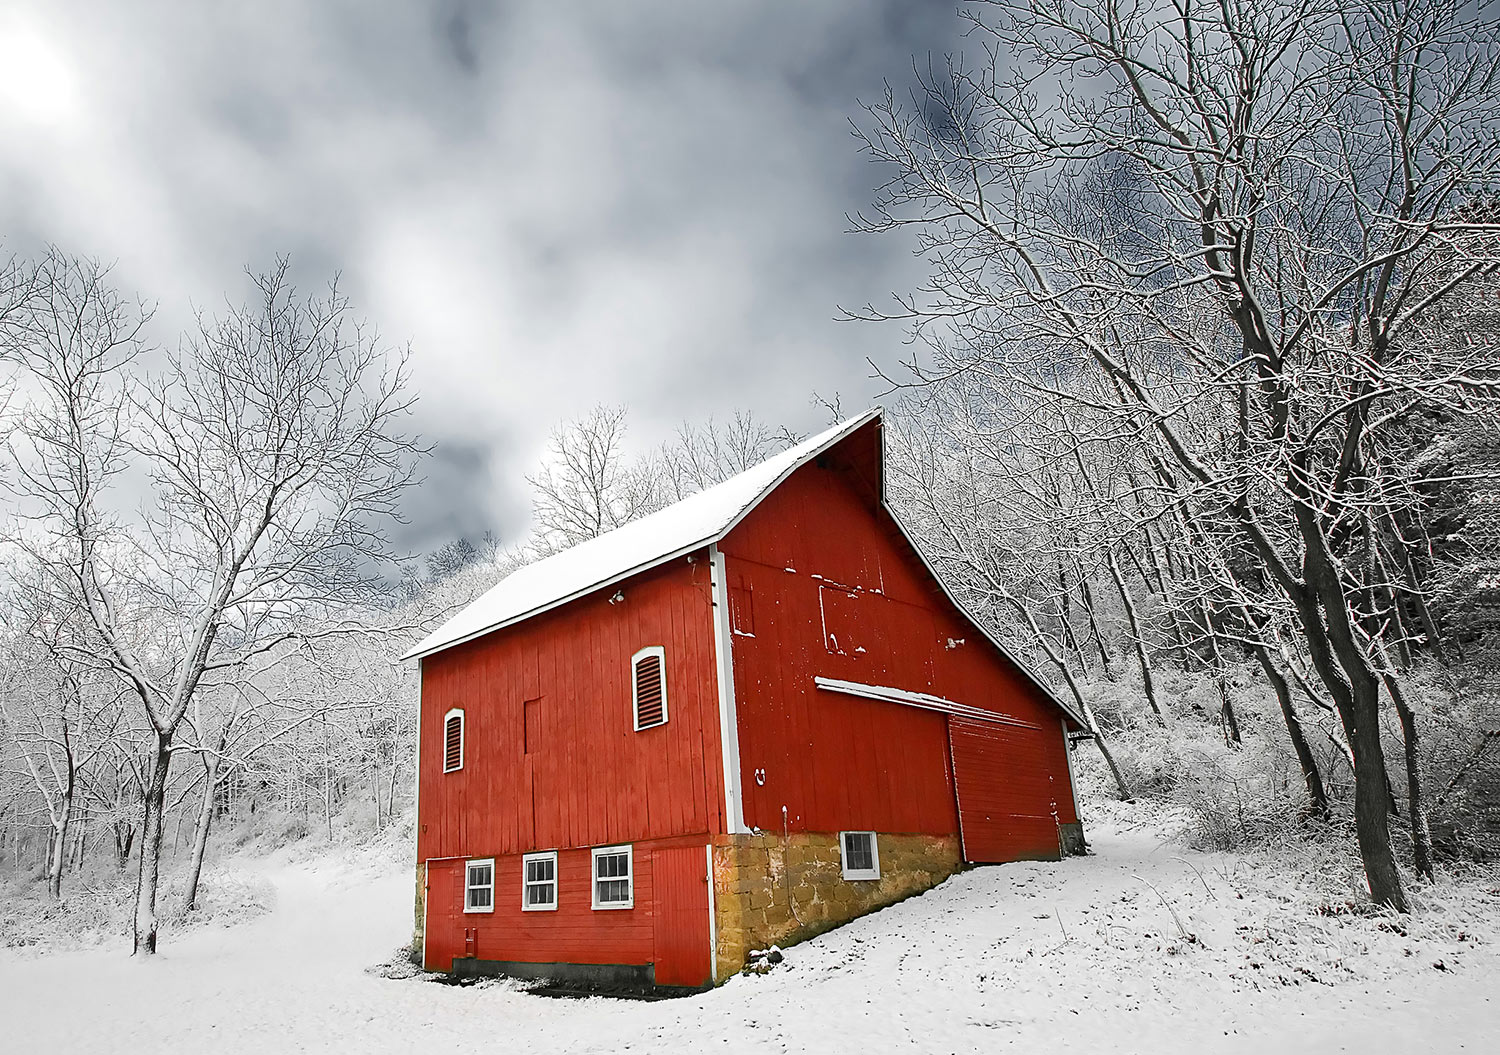 Freshly fallen snow clings to a little red barn on a small farm in the trees.&nbsp;→ Buy a Print